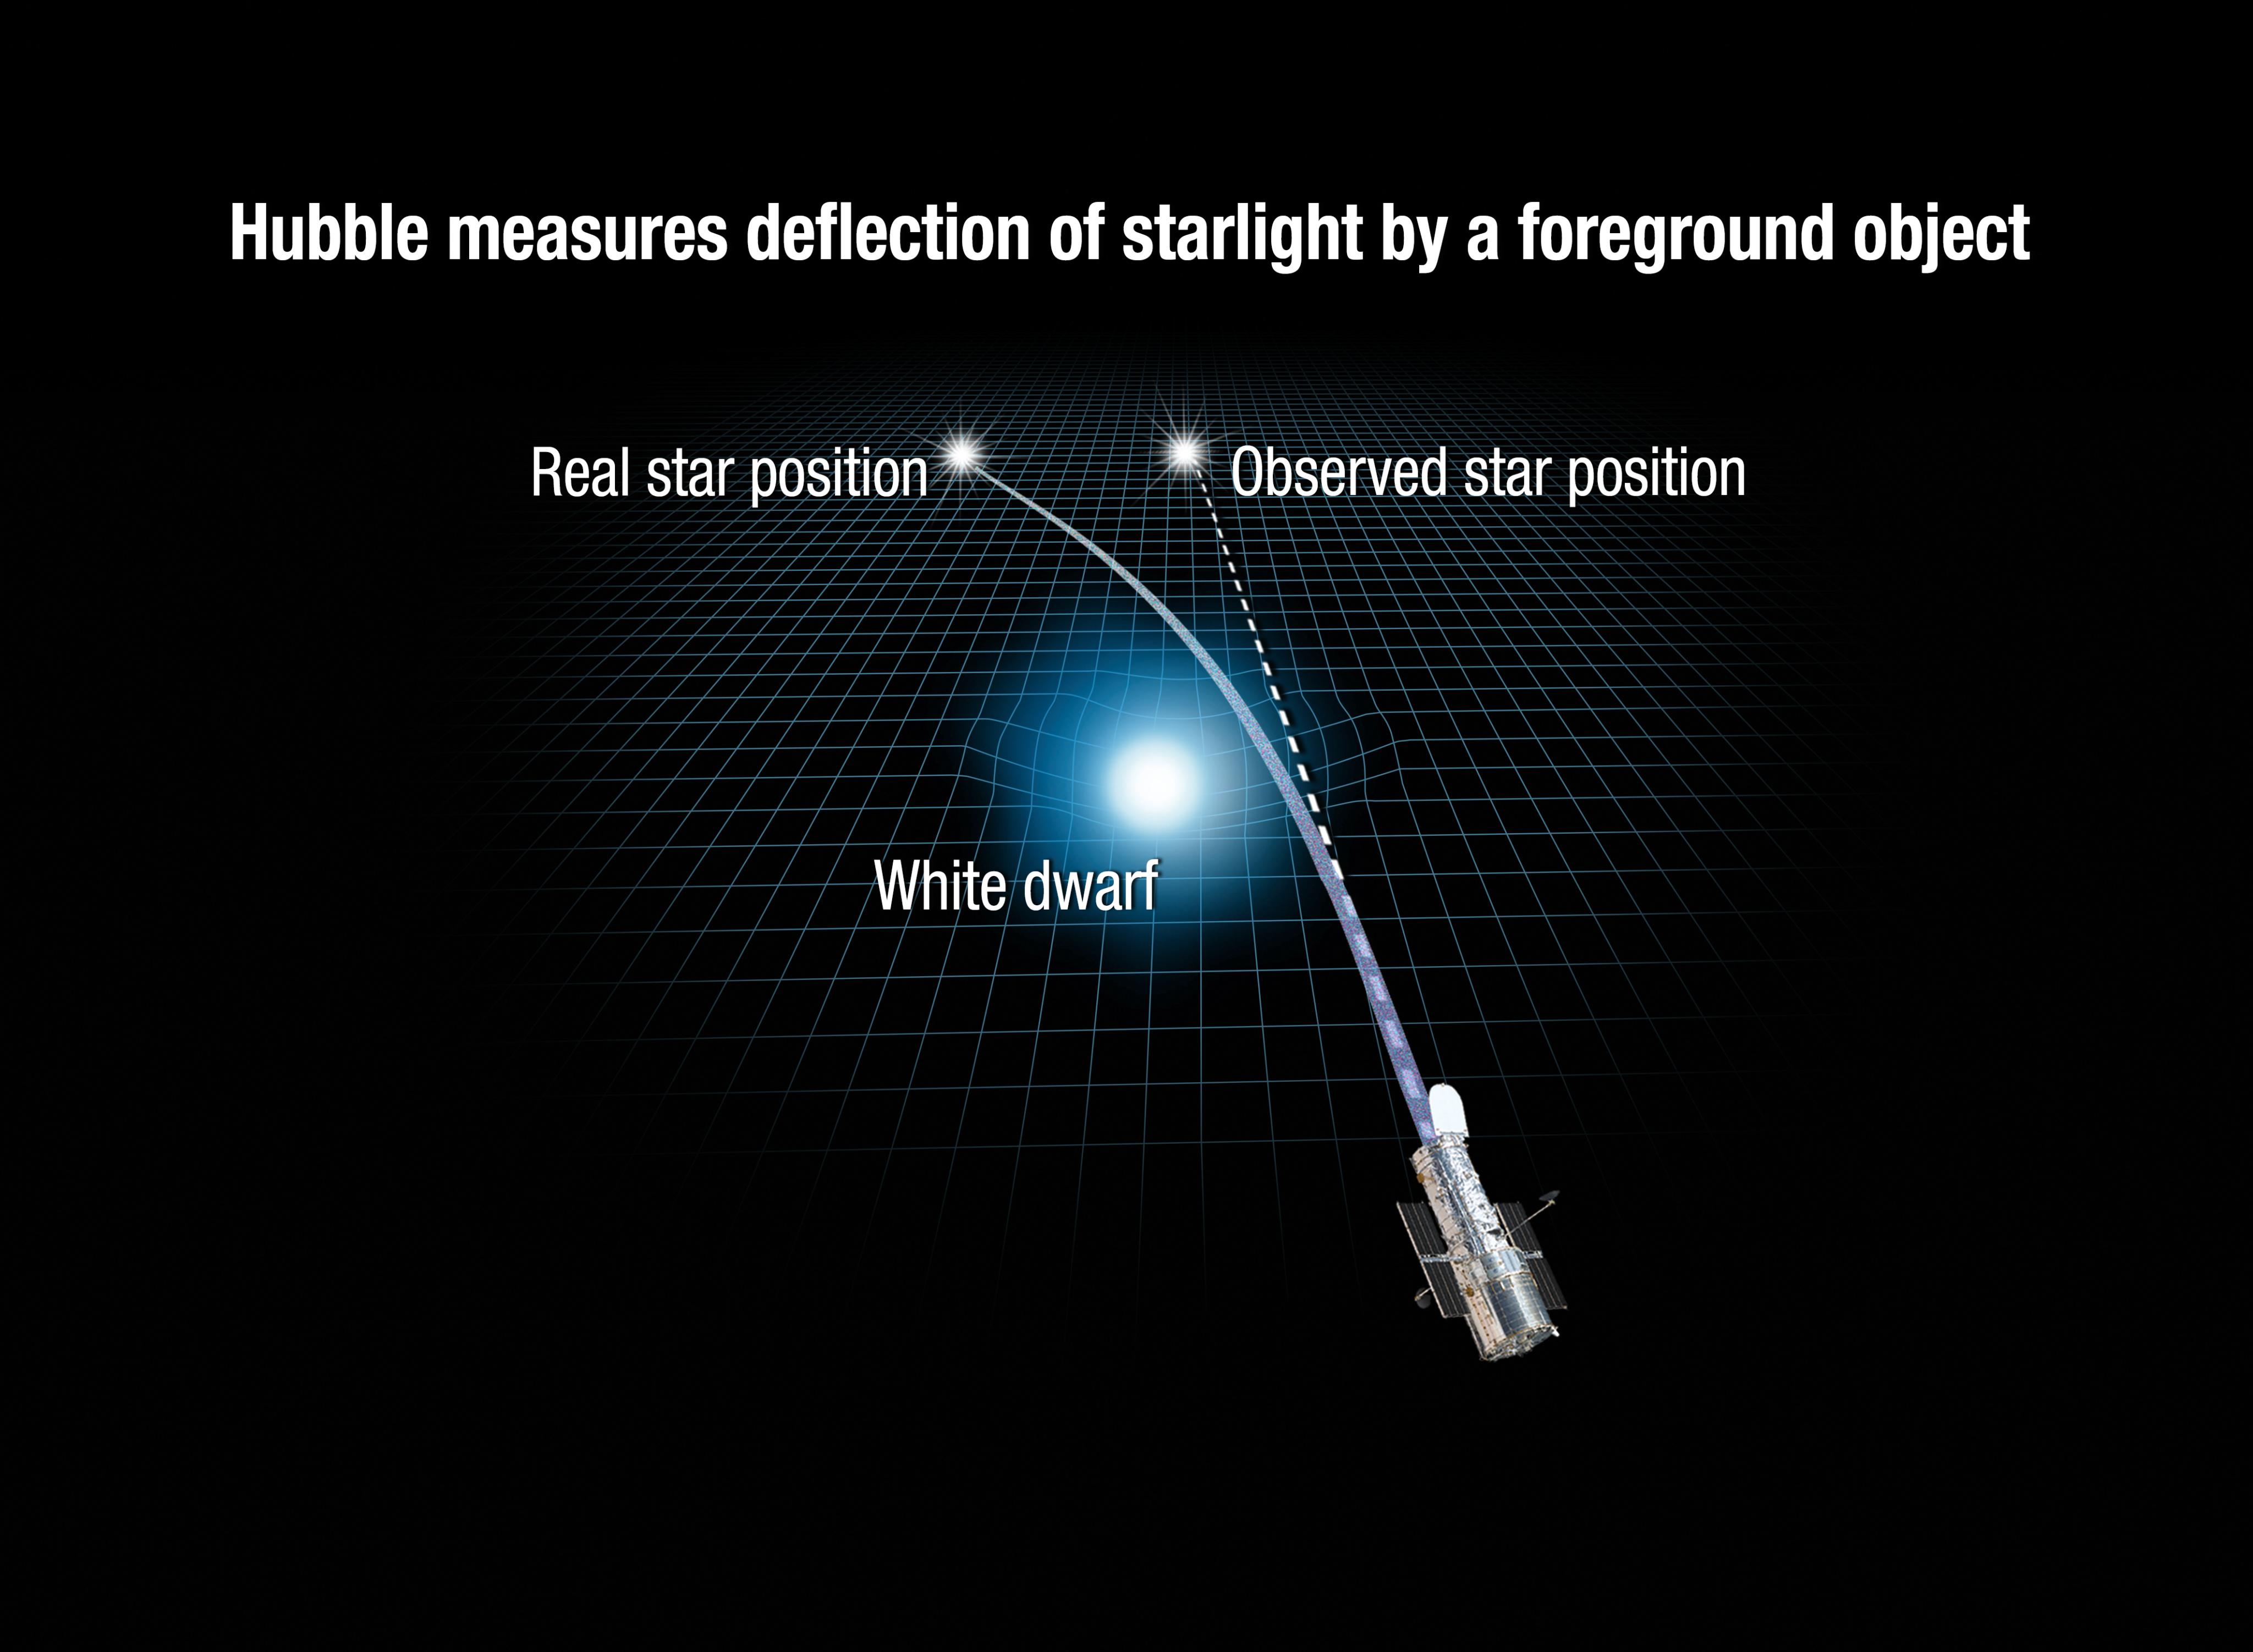 Illustration center: blue-white star (white dwarf) rests on a grid representing the fabric of spacetime. Lower right of white dwarf: illustration of Hubble. Above white dwarf: the actual and observed position of the gravitationally lensed star.